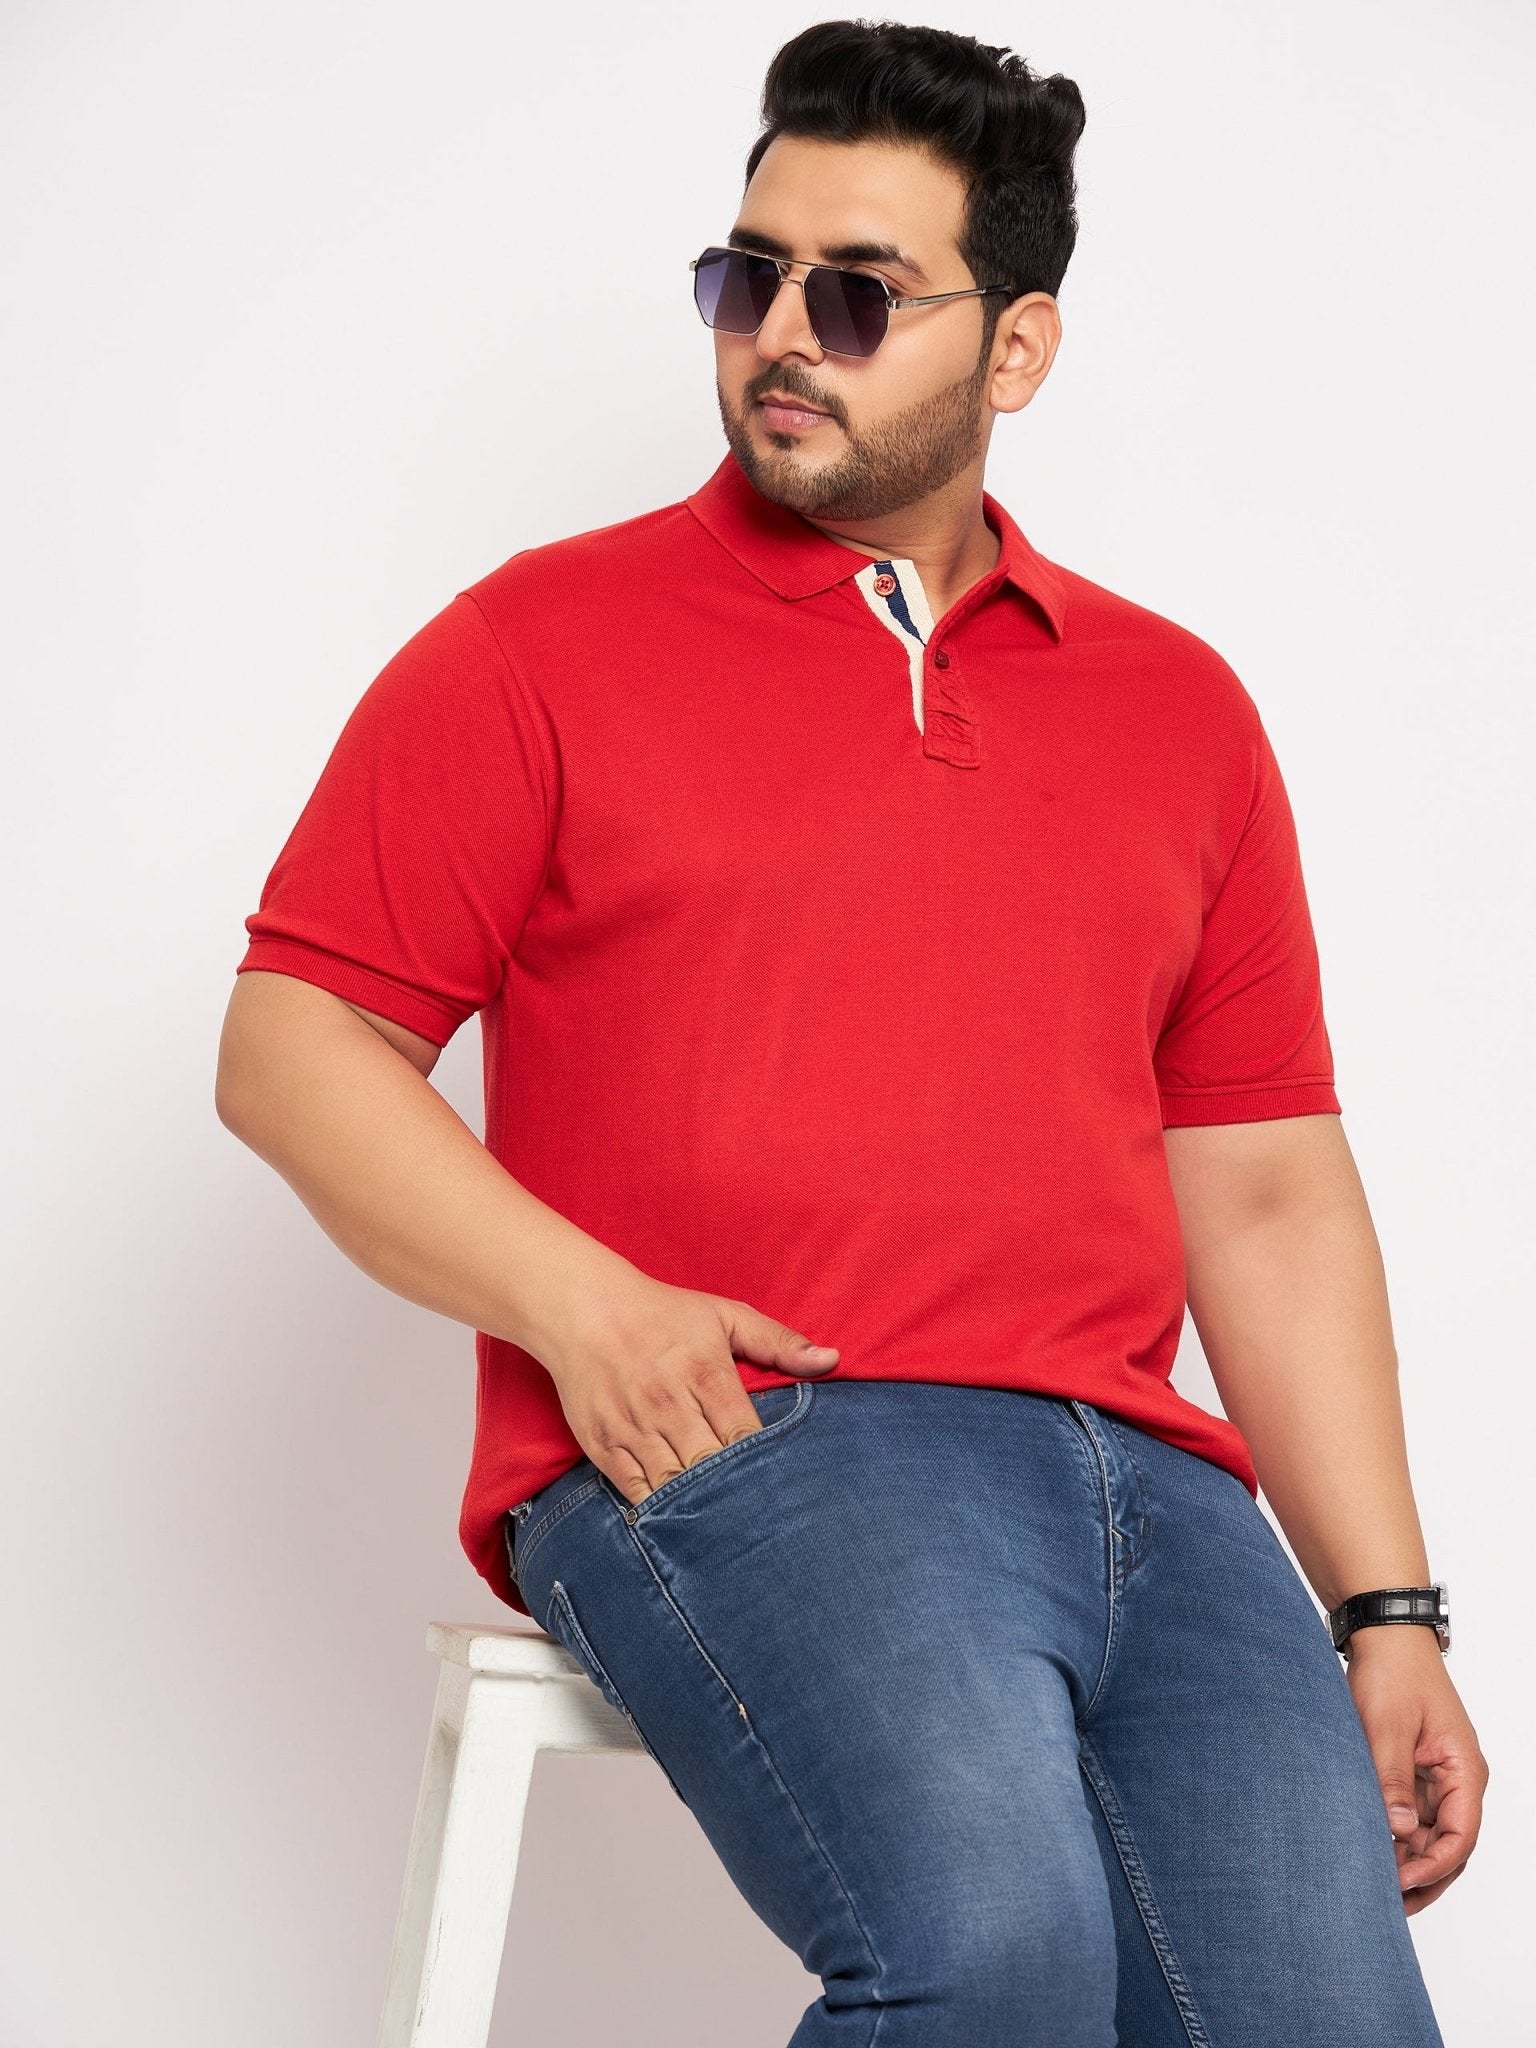 Plus size Red Polo T-Shirt - clubyork